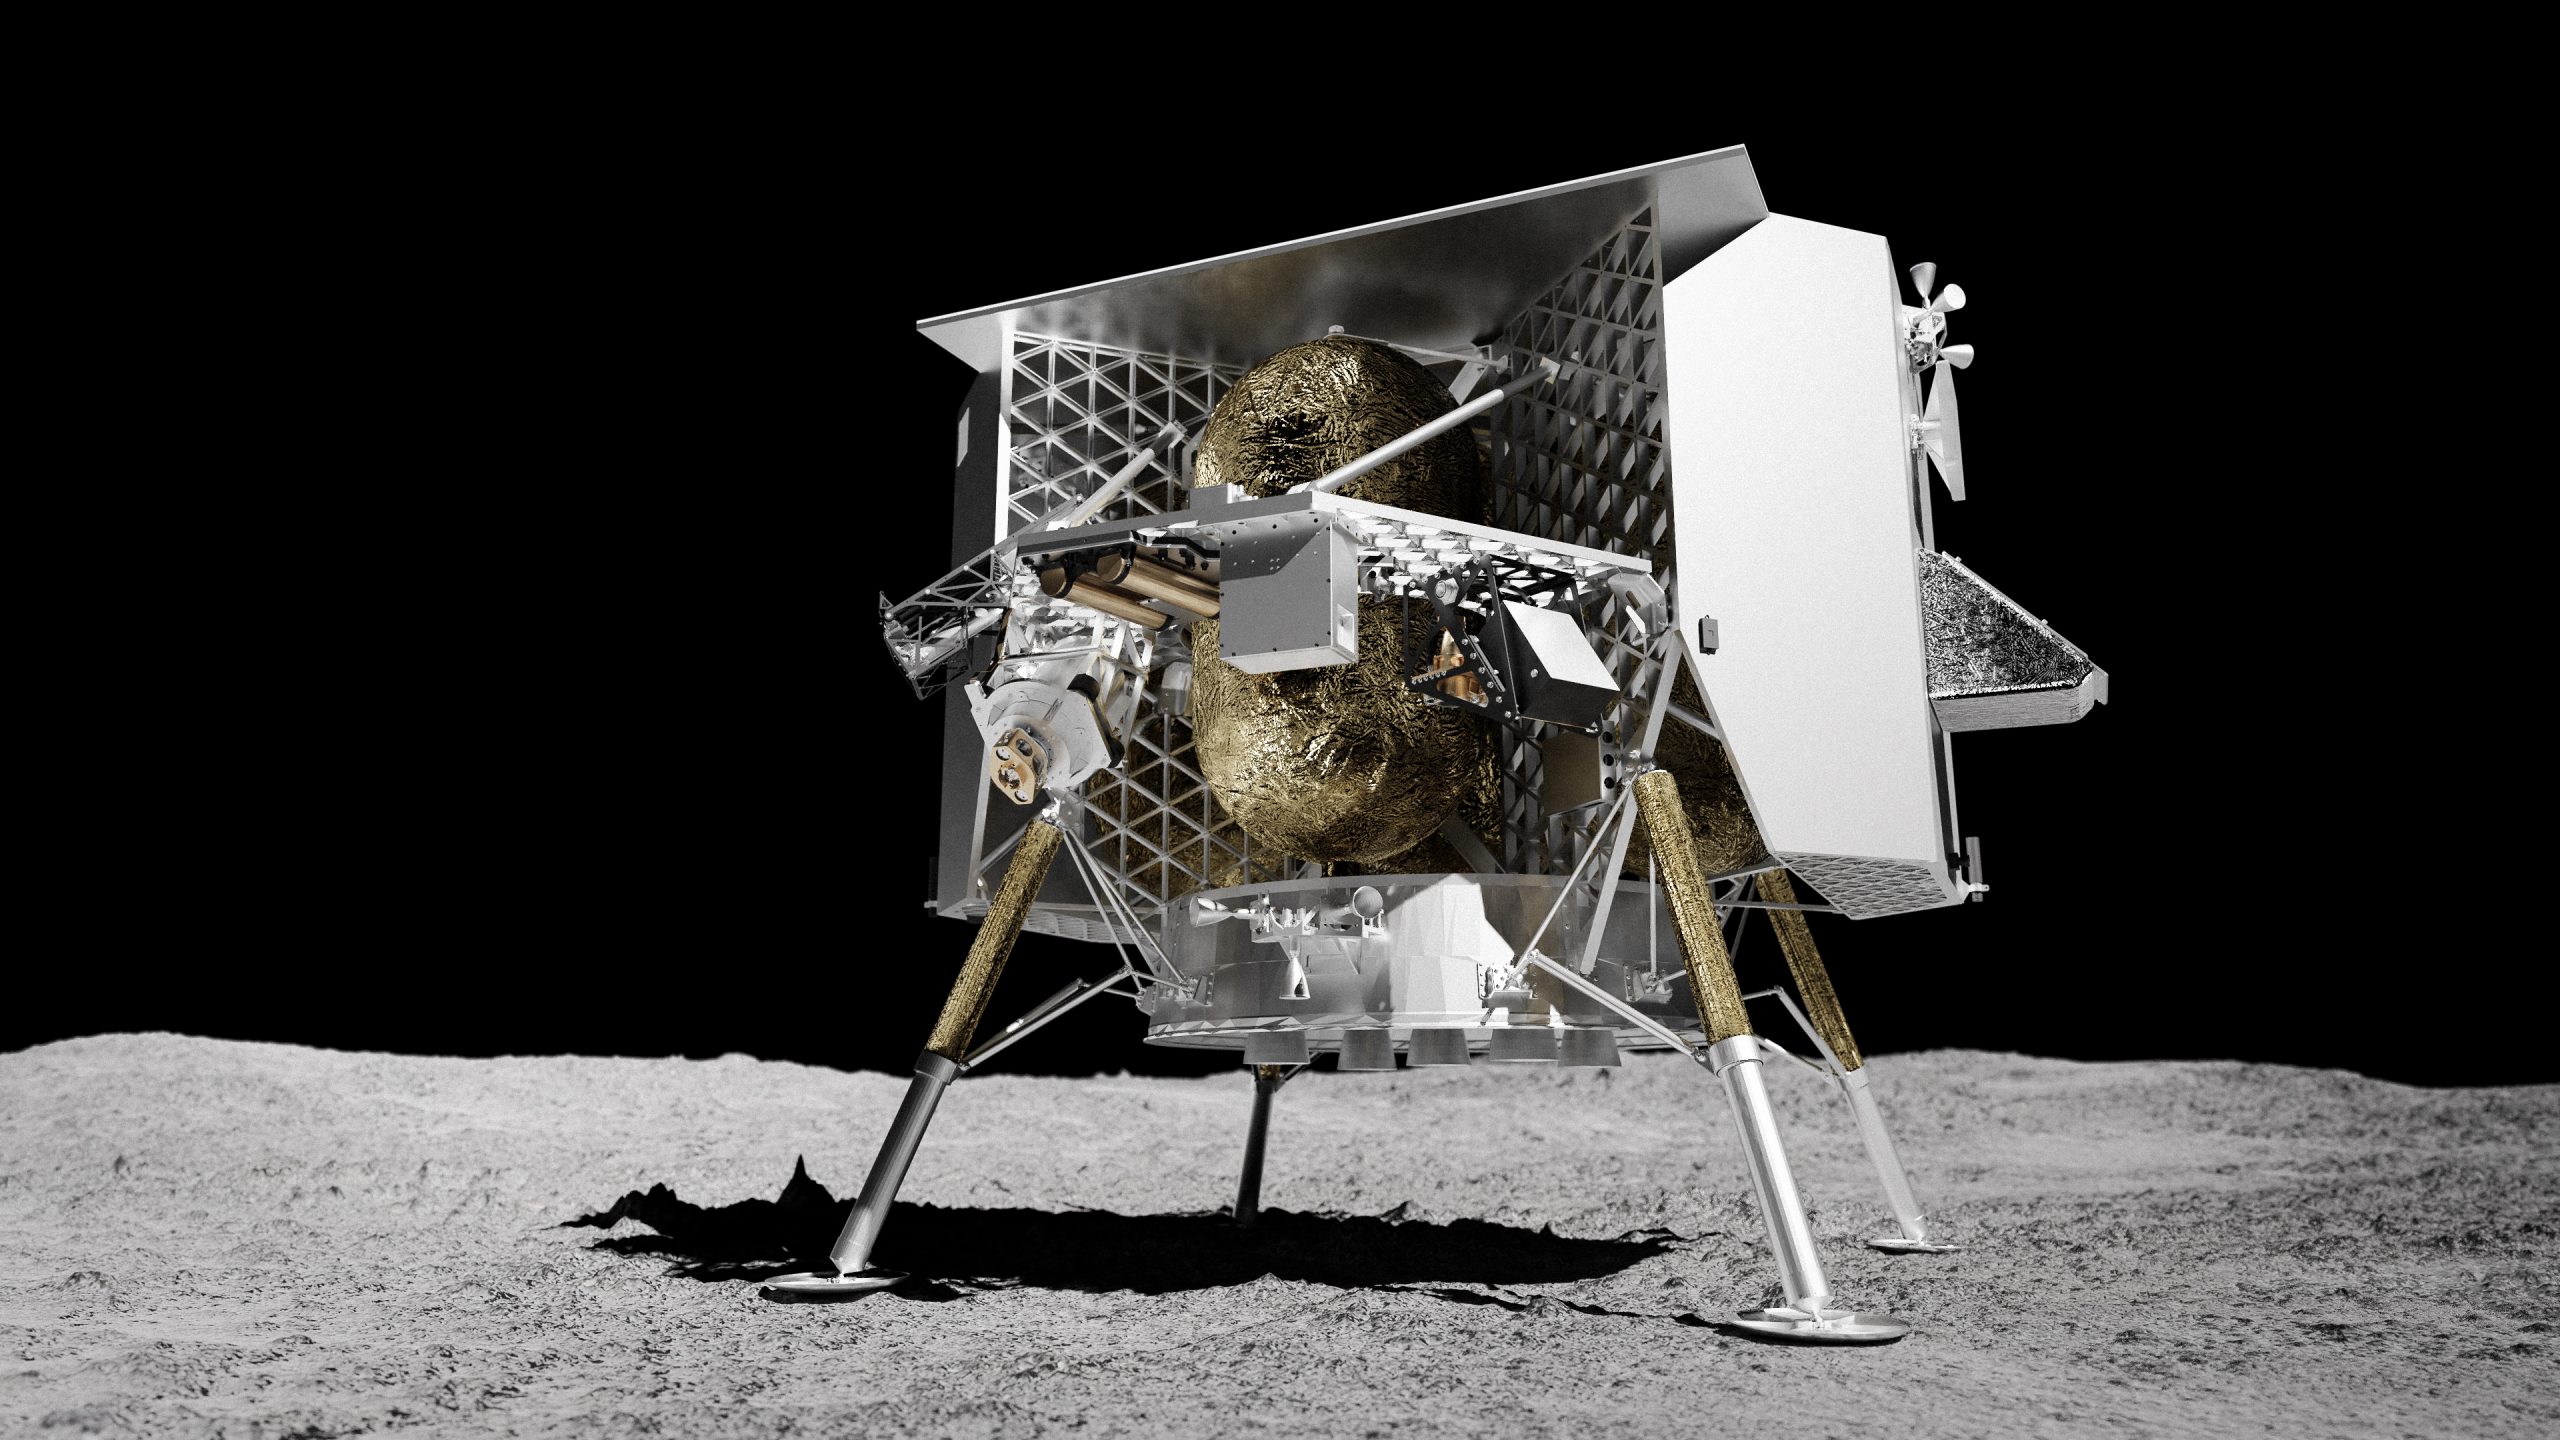 Solar powered moon rovers will help scientists find moon ice - Discover Magazine